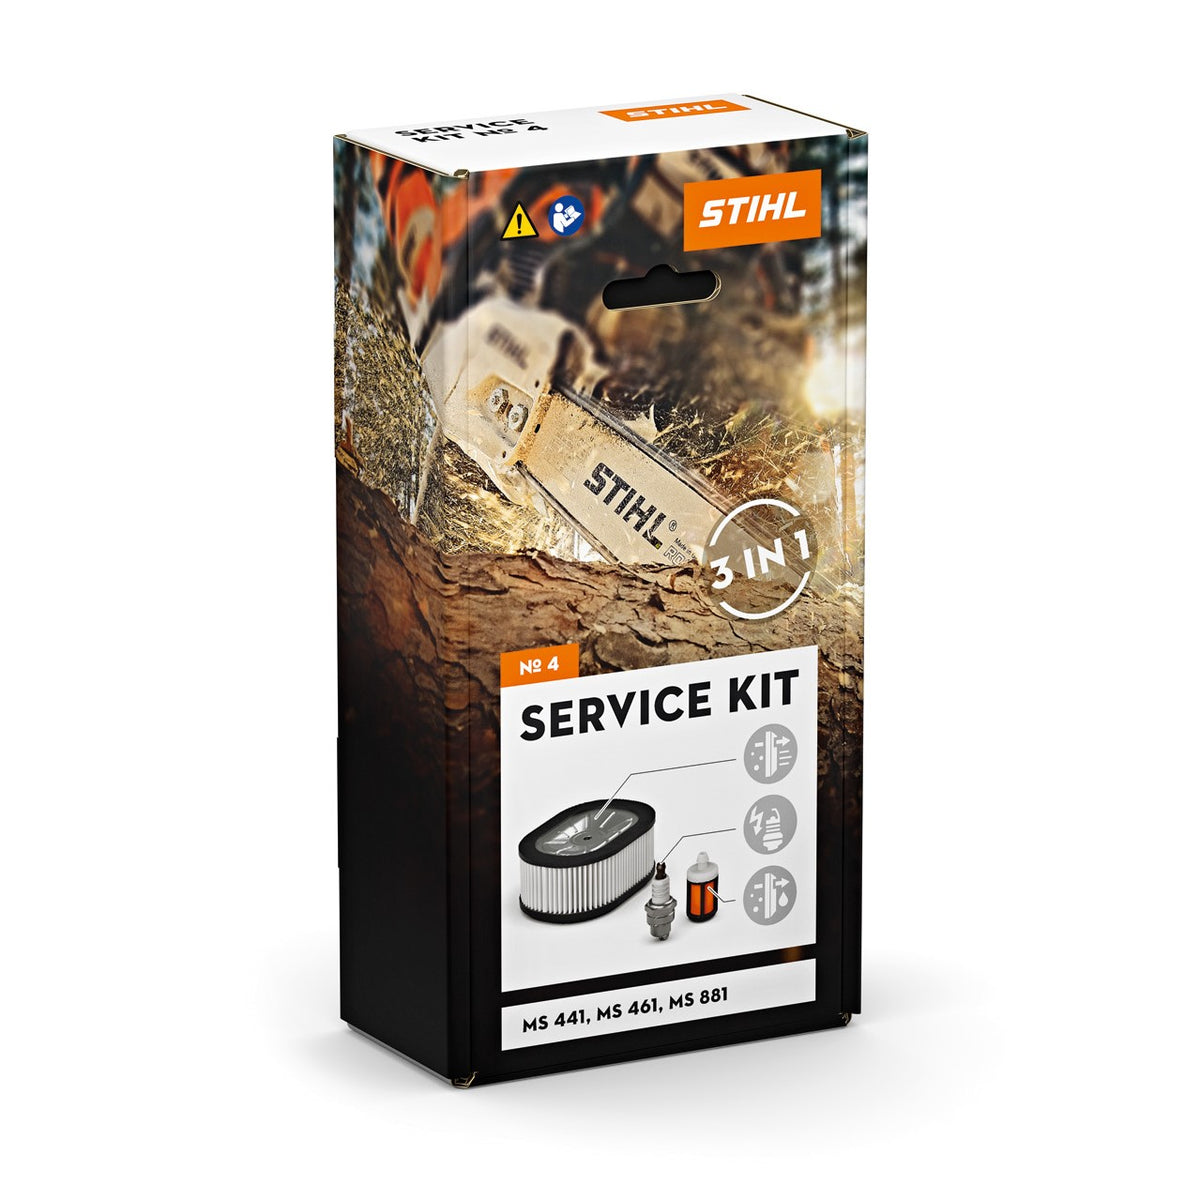 Stihl Service Kit 4 (for MS 441 / MS 461 / MS 881) — Balmers GM